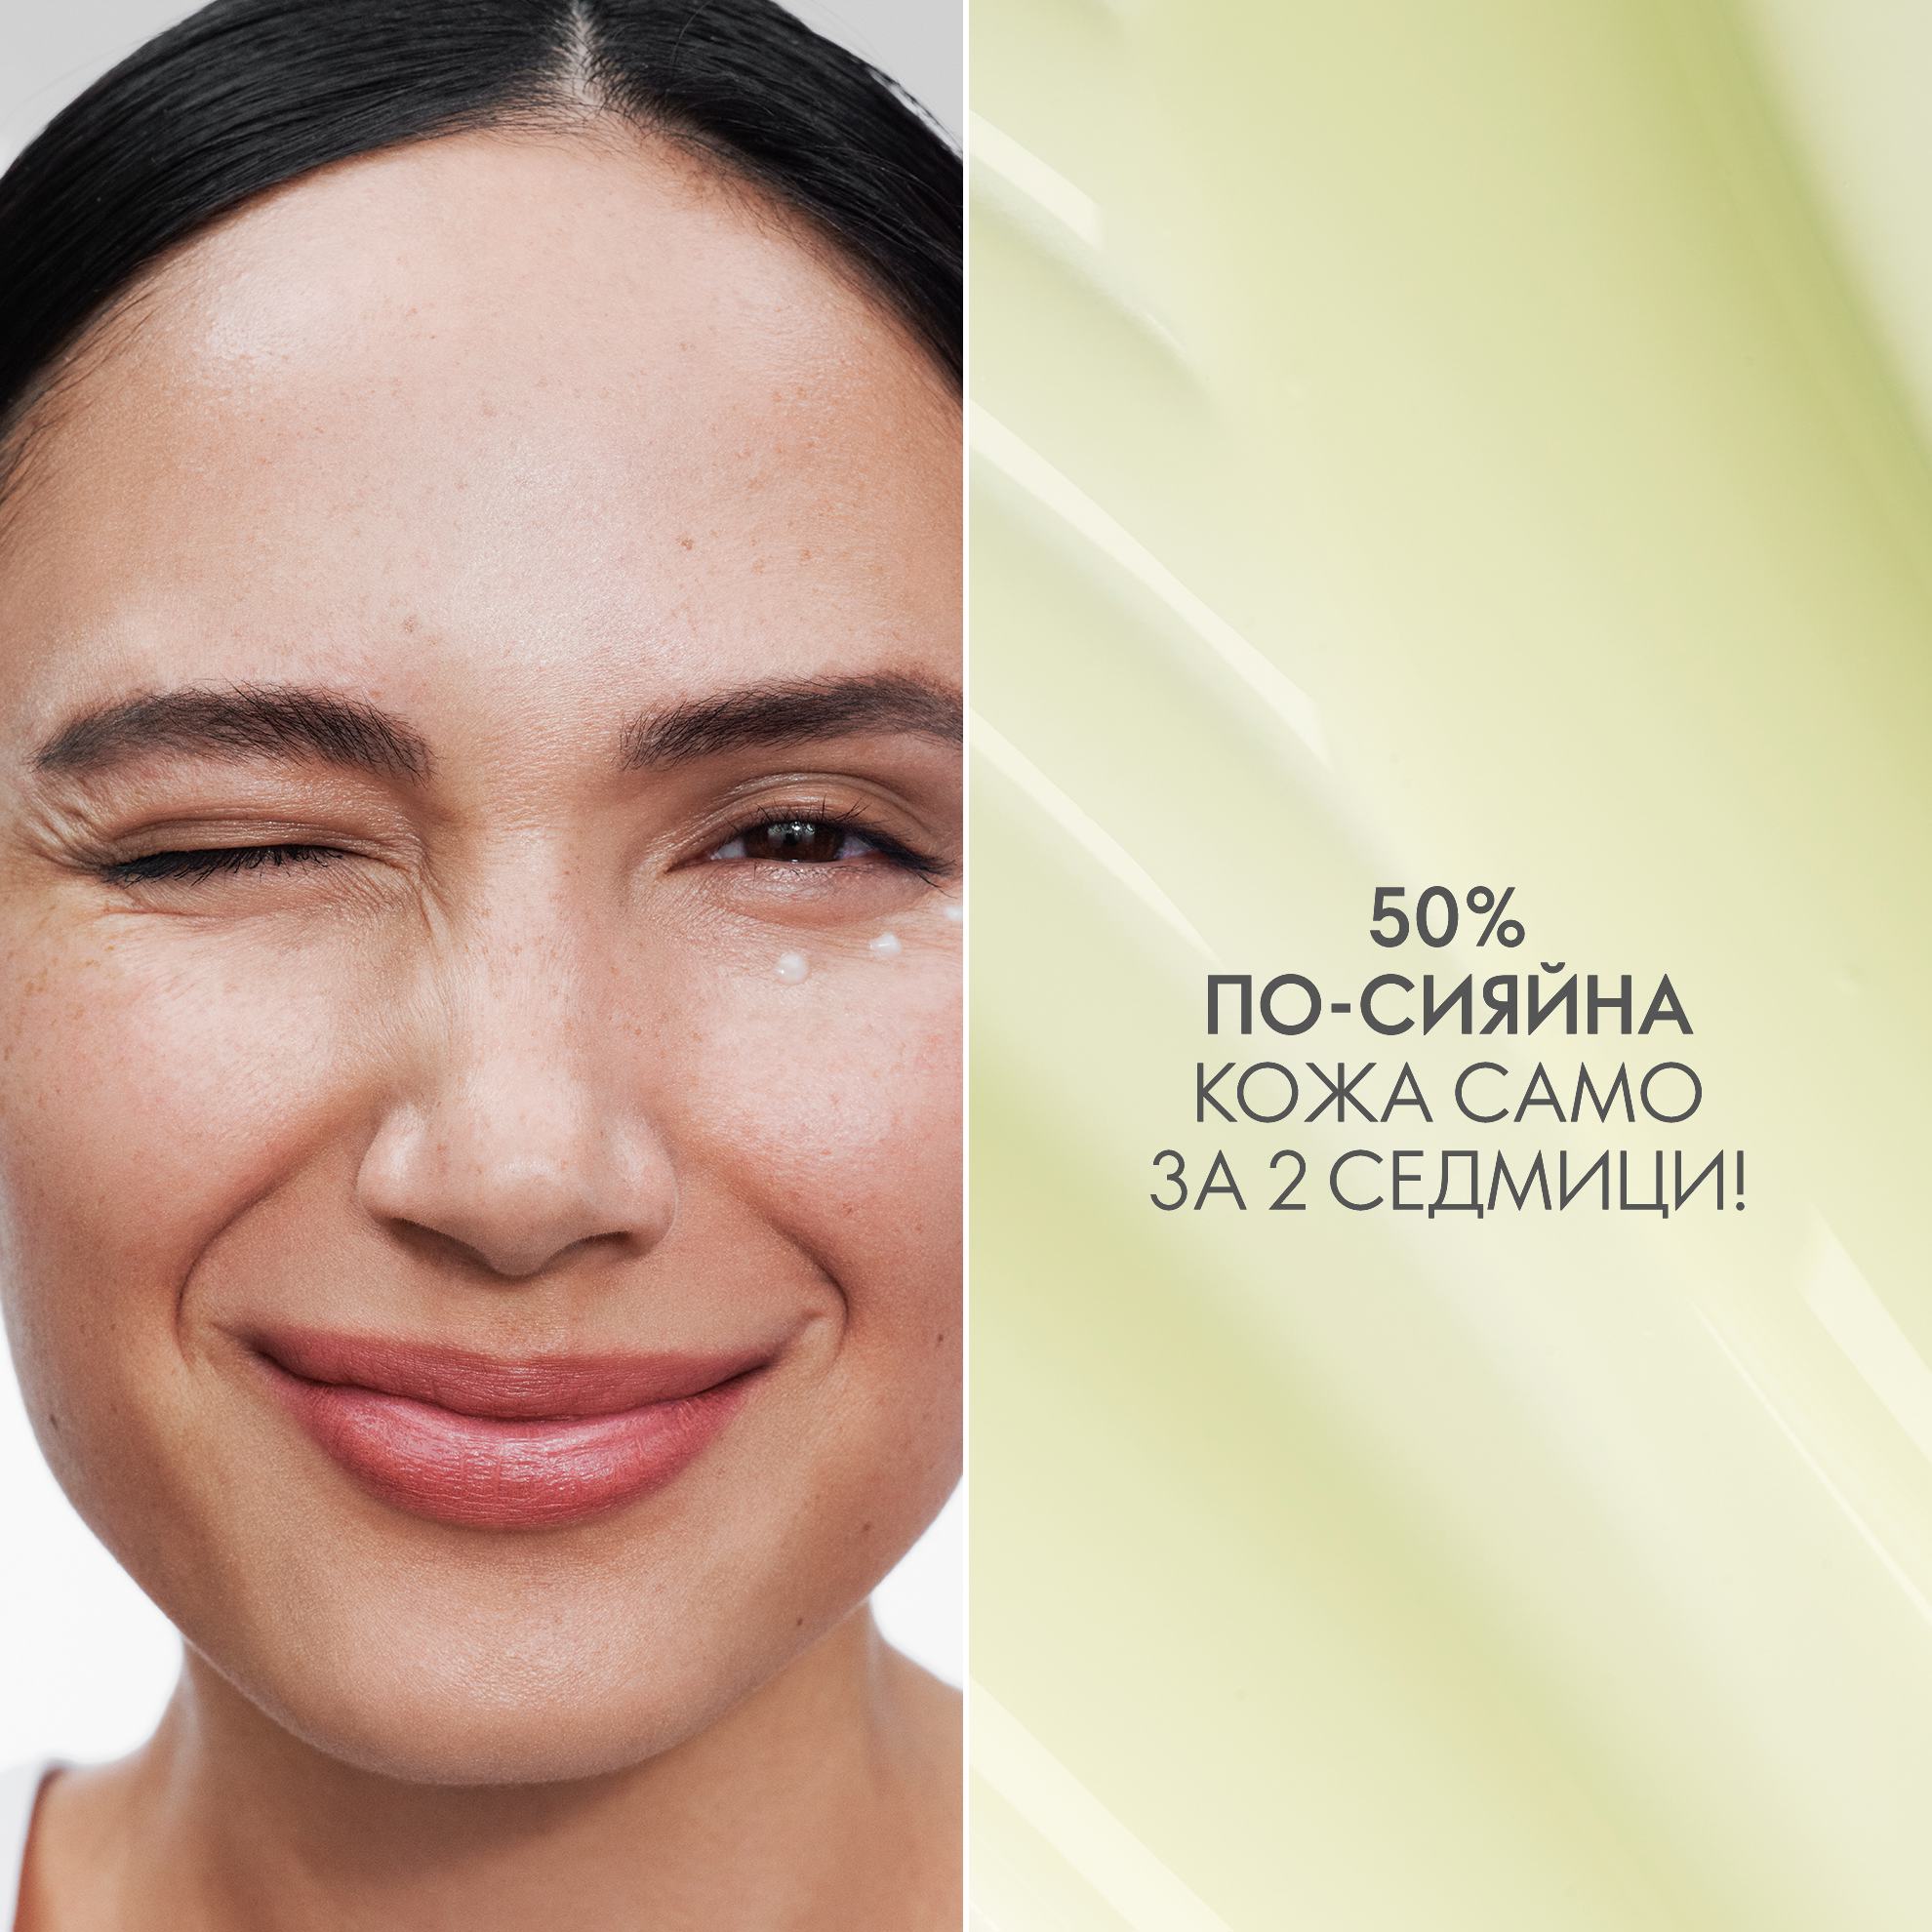 https://media-cdn.oriflame.com/productImage?externalMediaId=product-management-media%2fProducts%2f45595%2fBG%2f45595_2.png&id=17575608&version=1